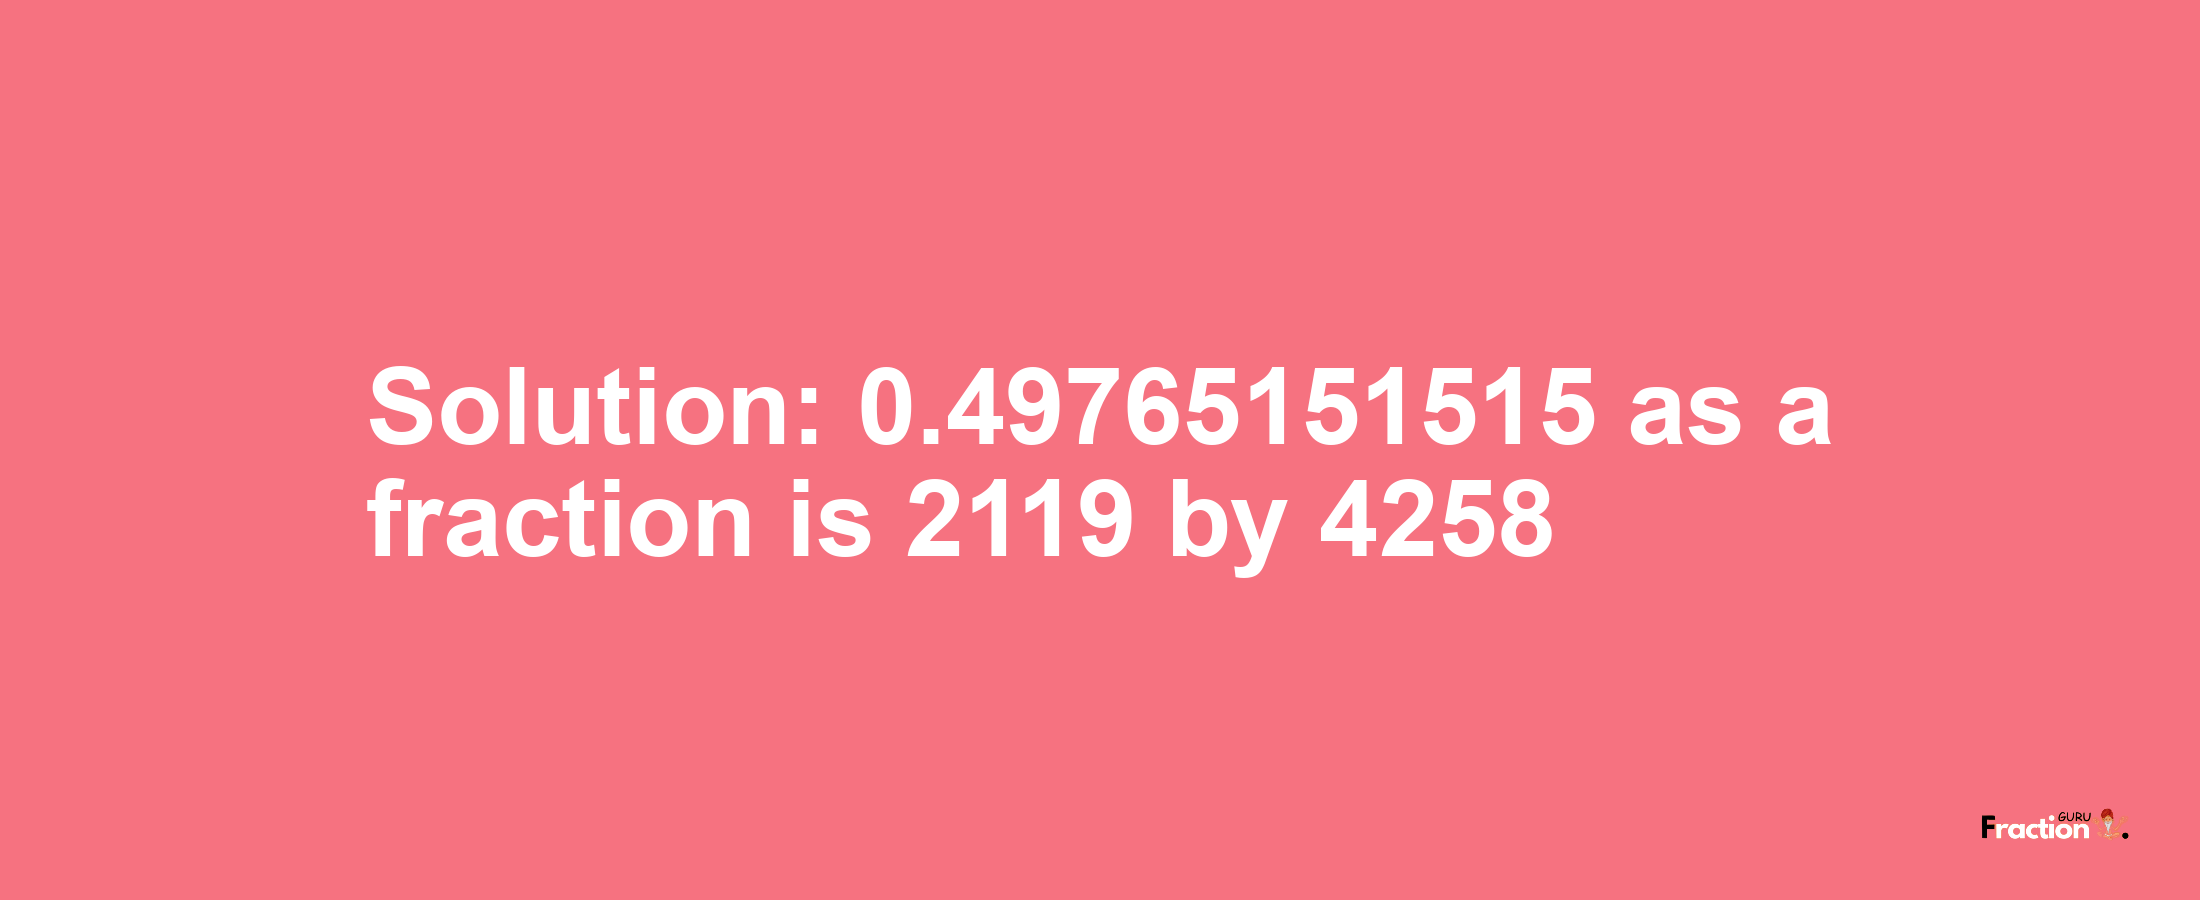 Solution:0.49765151515 as a fraction is 2119/4258